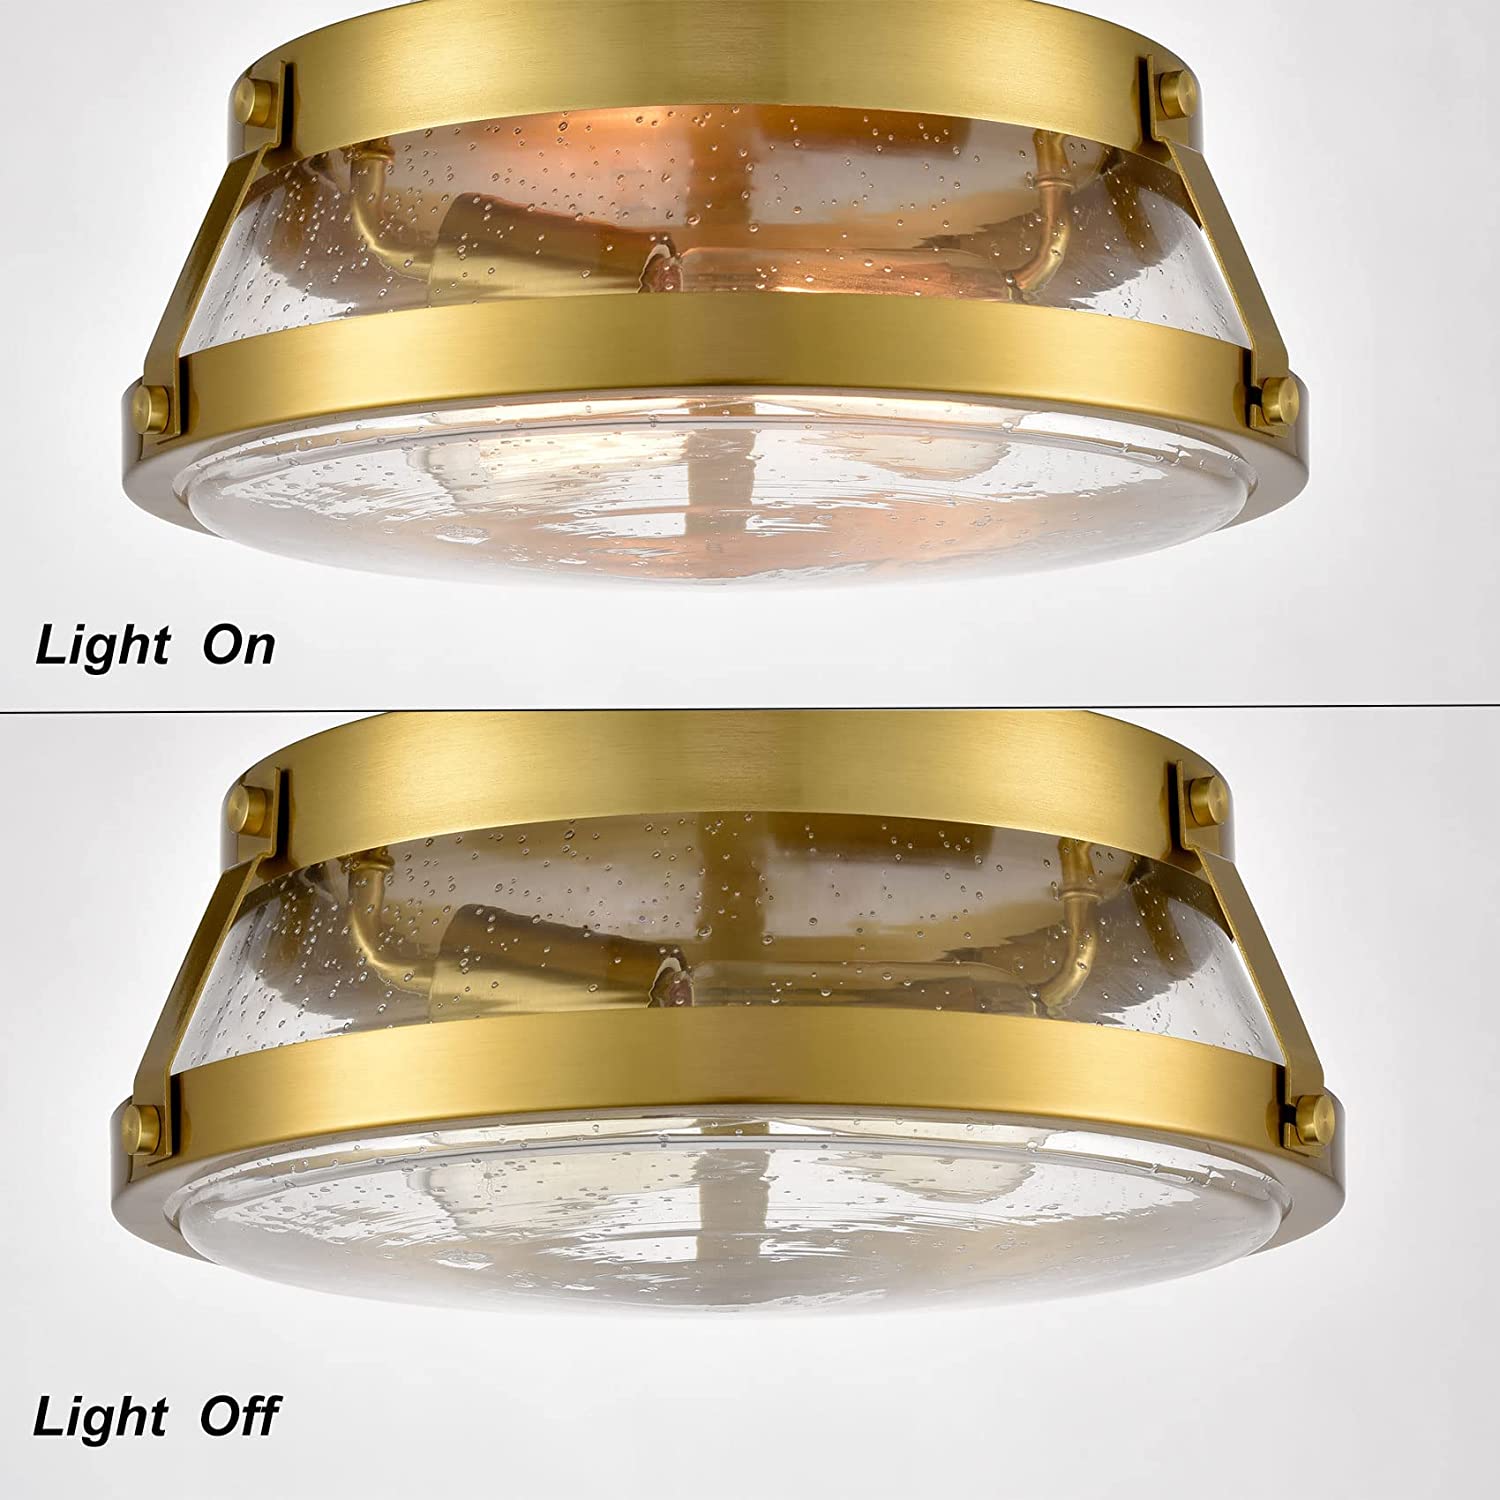 Industrial ceiling light fixture seeded glass ceiling lamp with brass finish